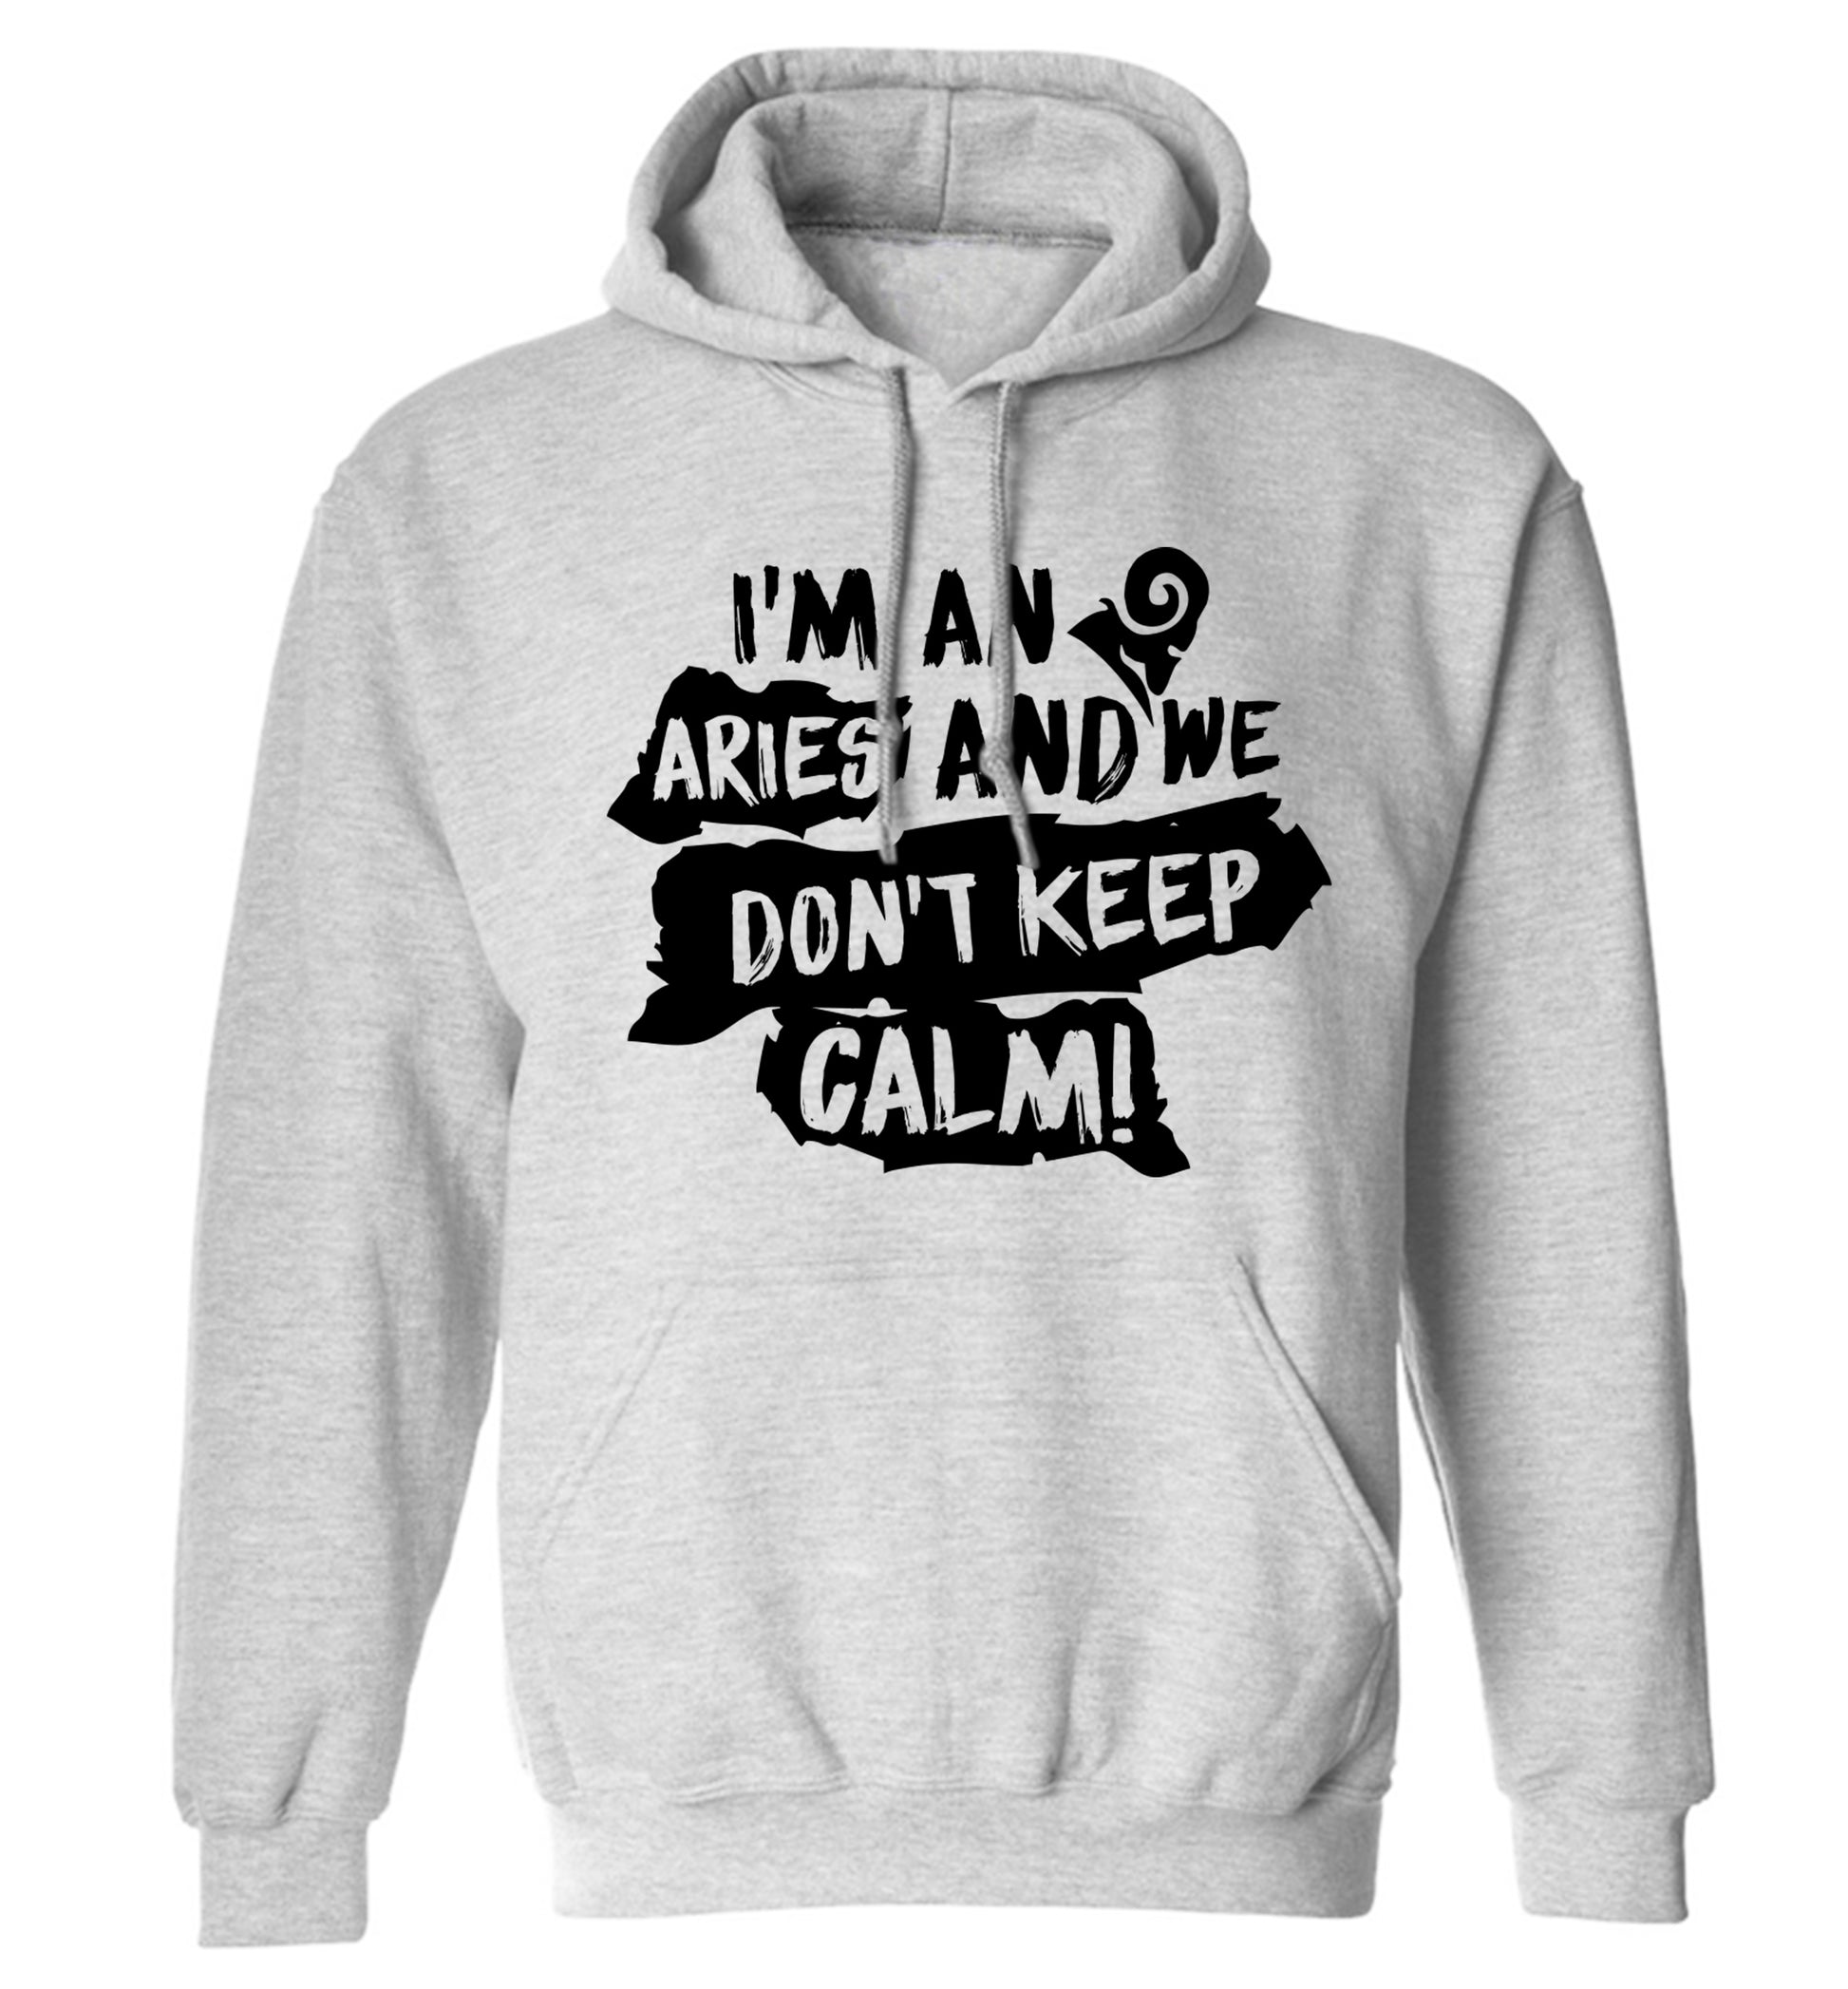 I'm an aries and we don't keep calm adults unisex grey hoodie 2XL